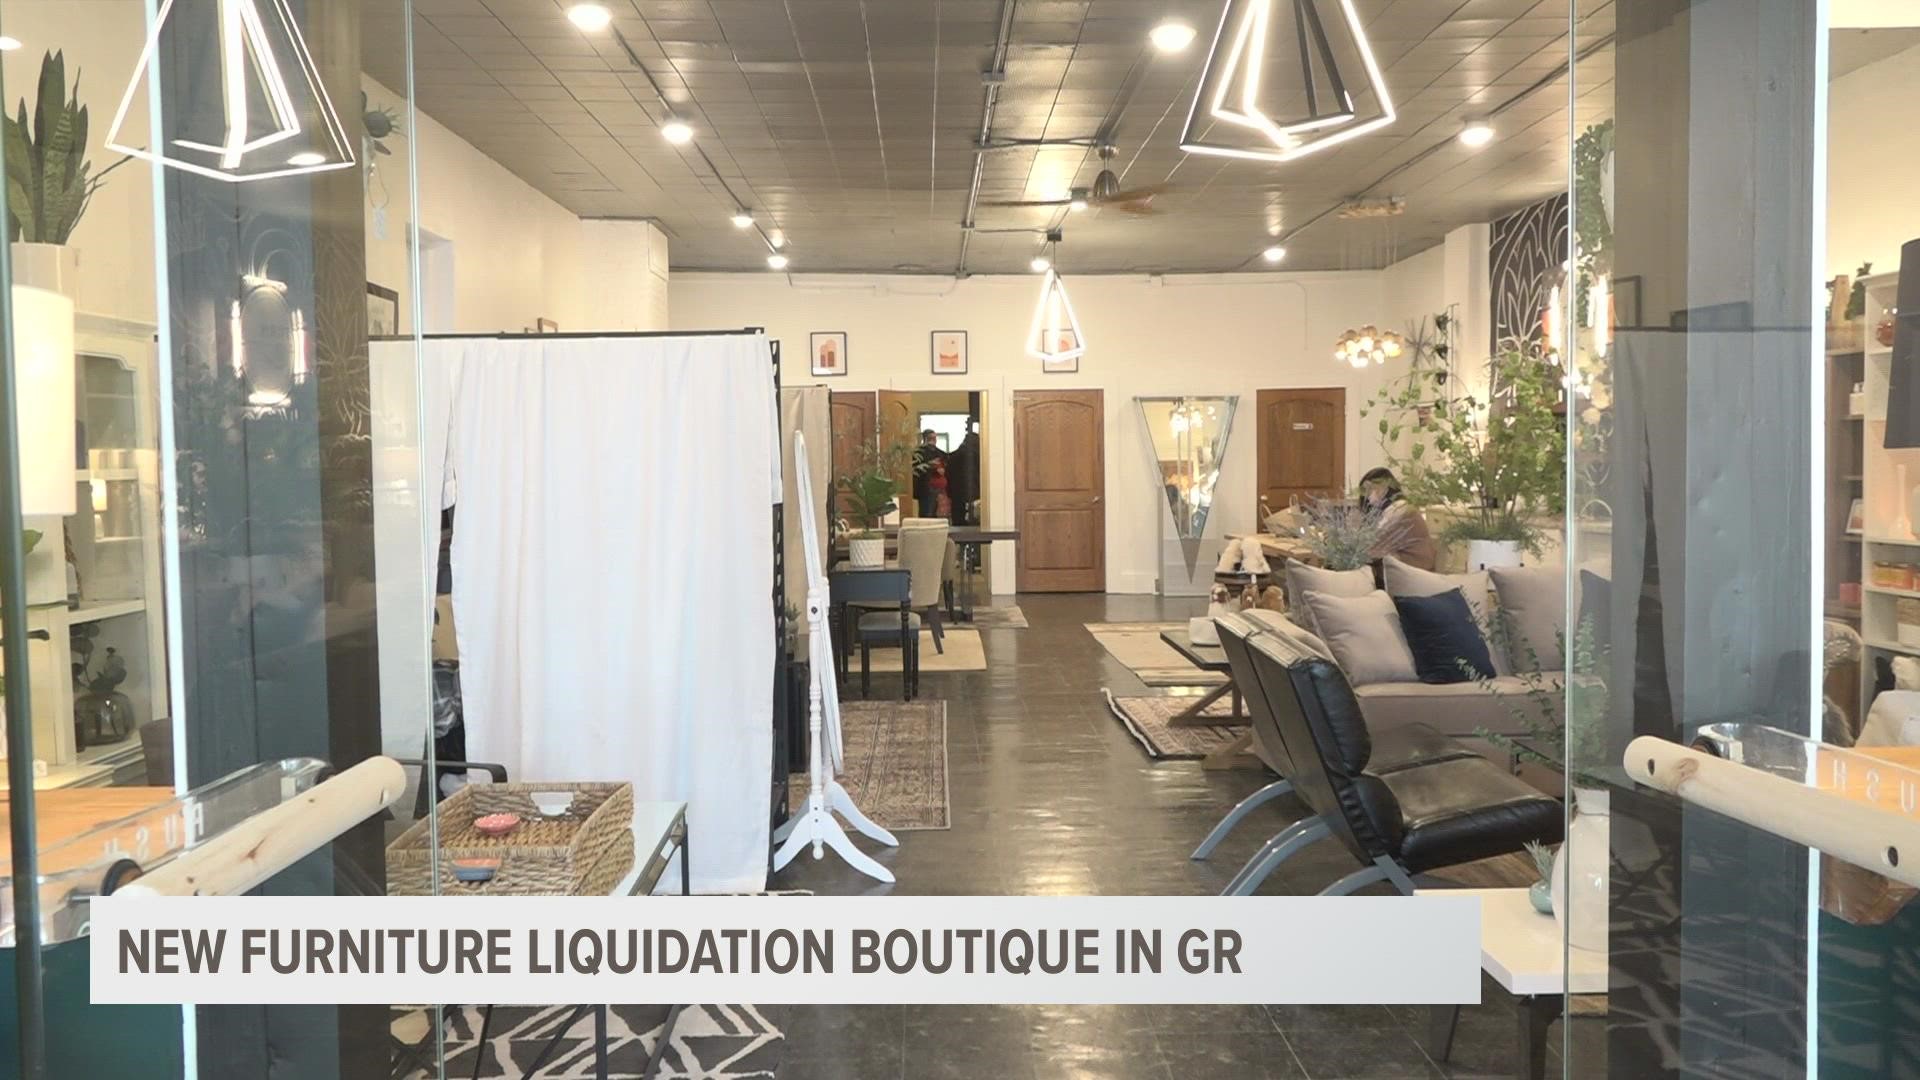 FURN on Leonard replenishes its inventory with overstock furniture from Wayfair and Target almost weekly as they sell product.